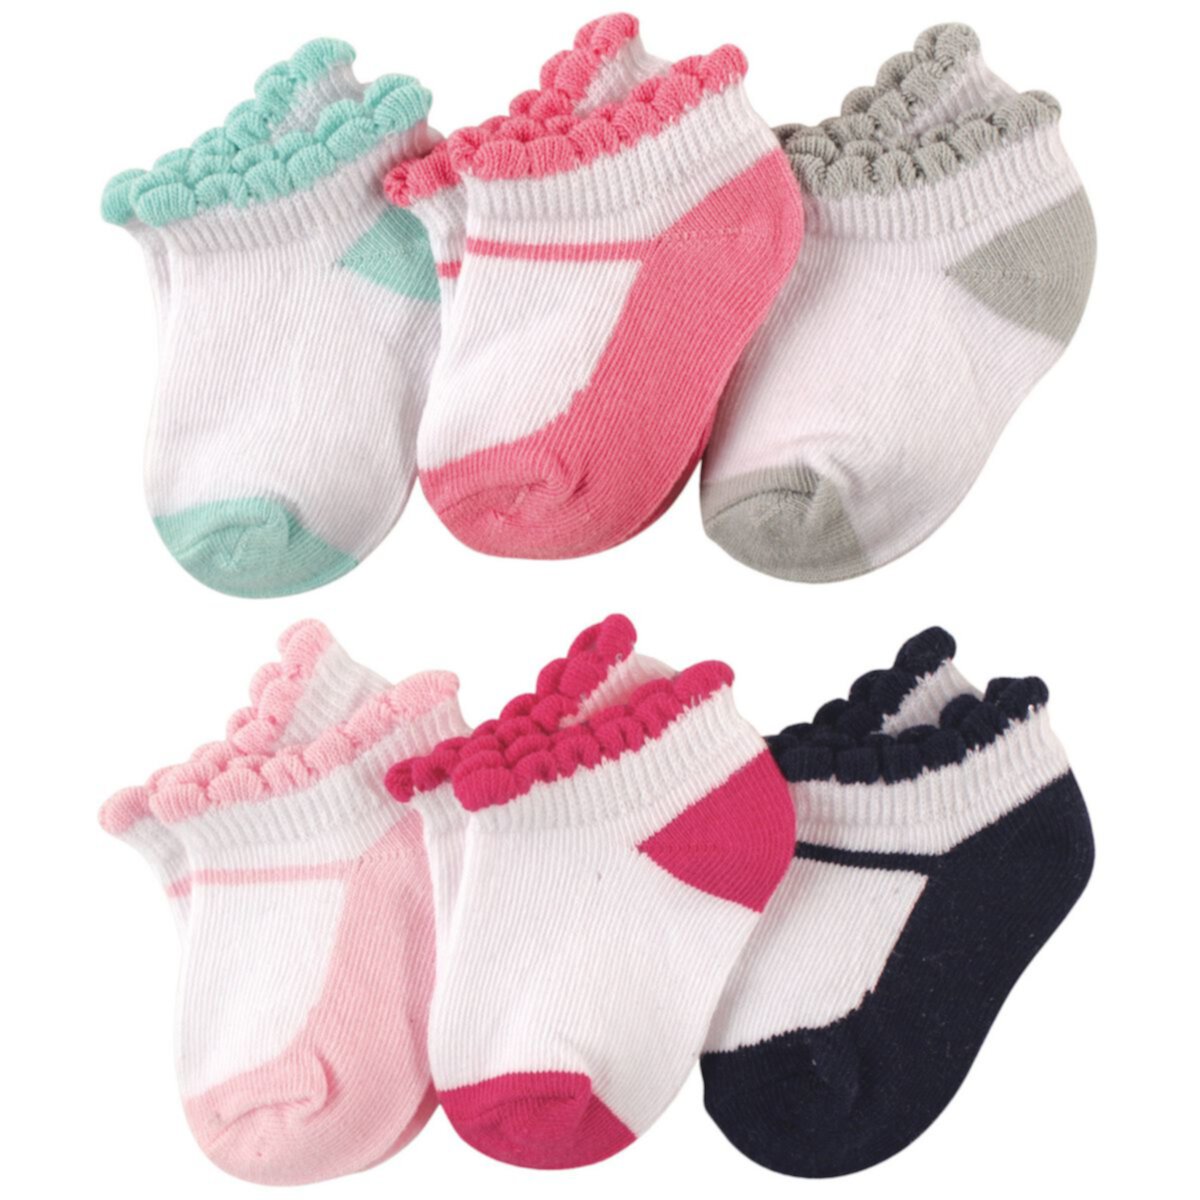 Luvable Friends Baby Girl Newborn and Baby Socks Set, Mary Jane Luvable Friends